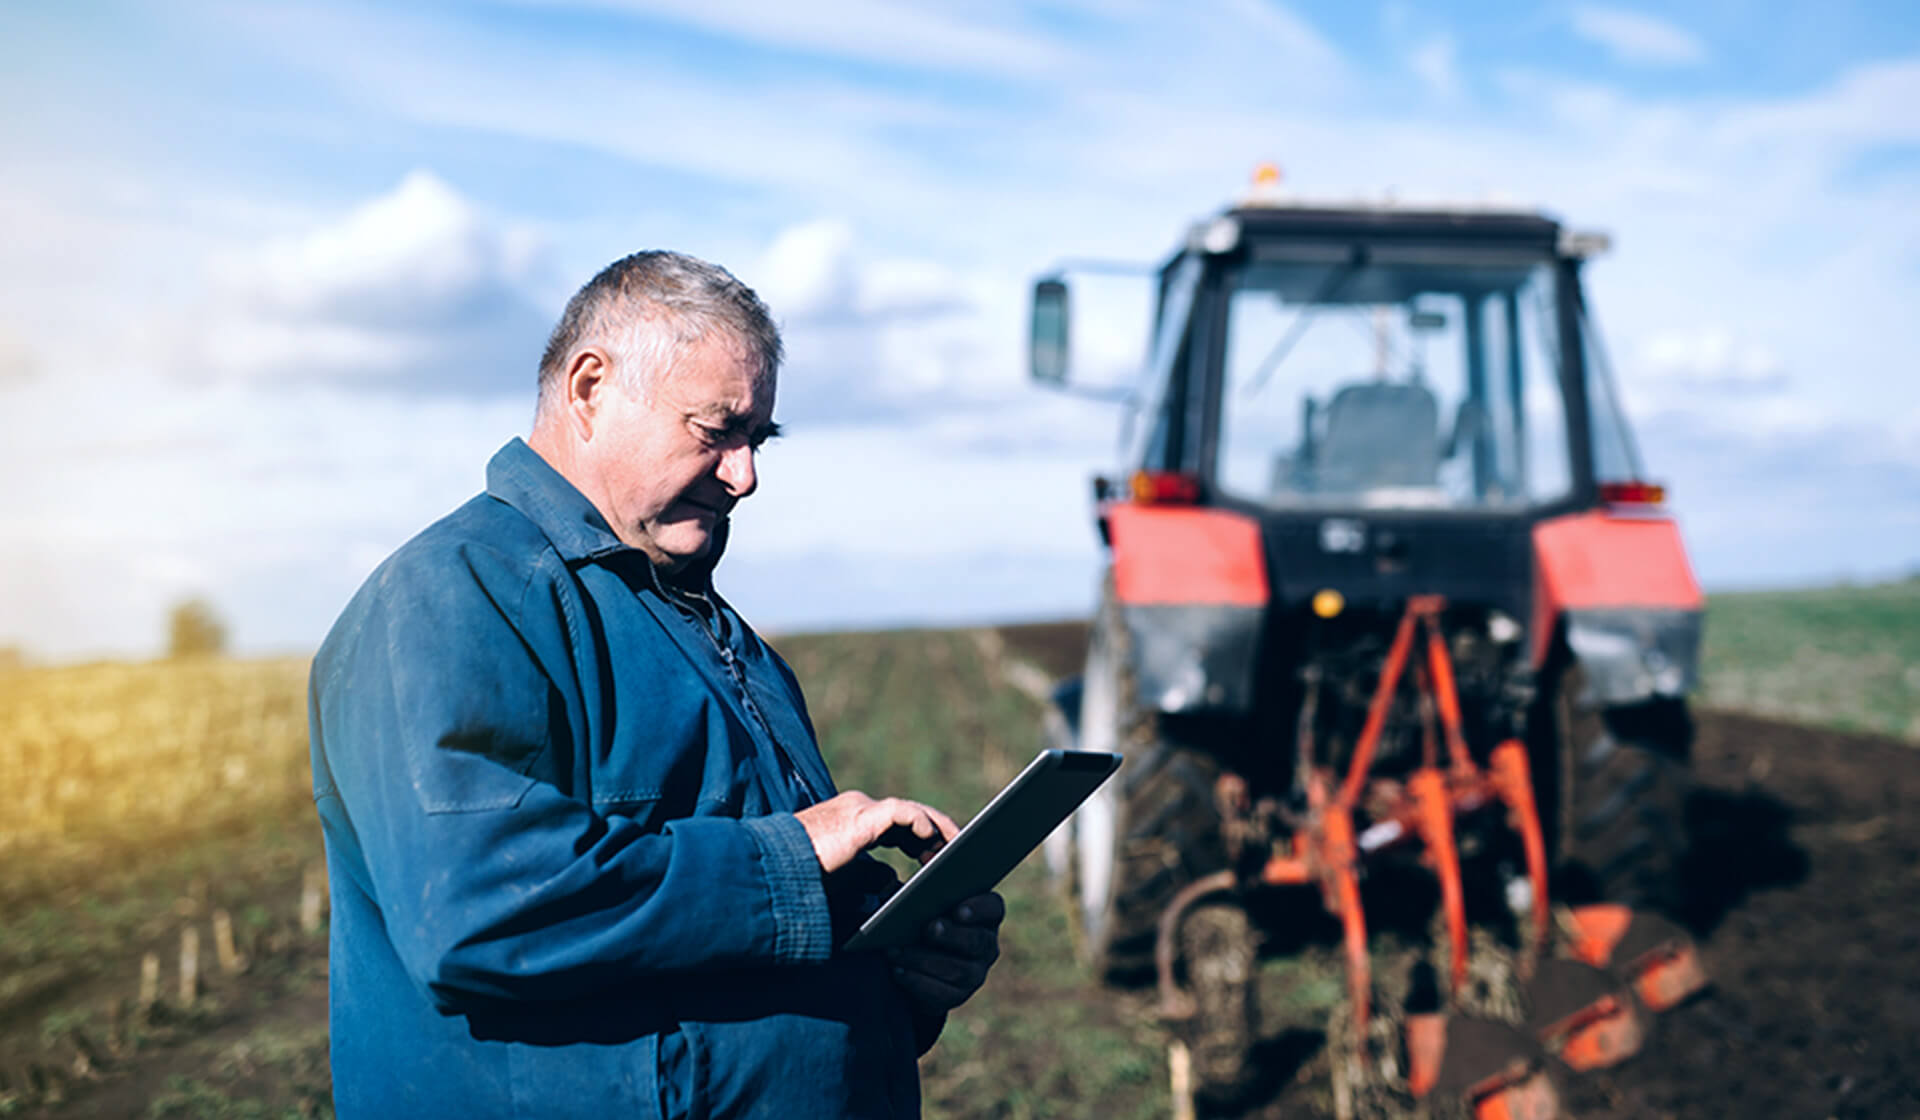 Farmer using a tablet on field with red tractor in the background